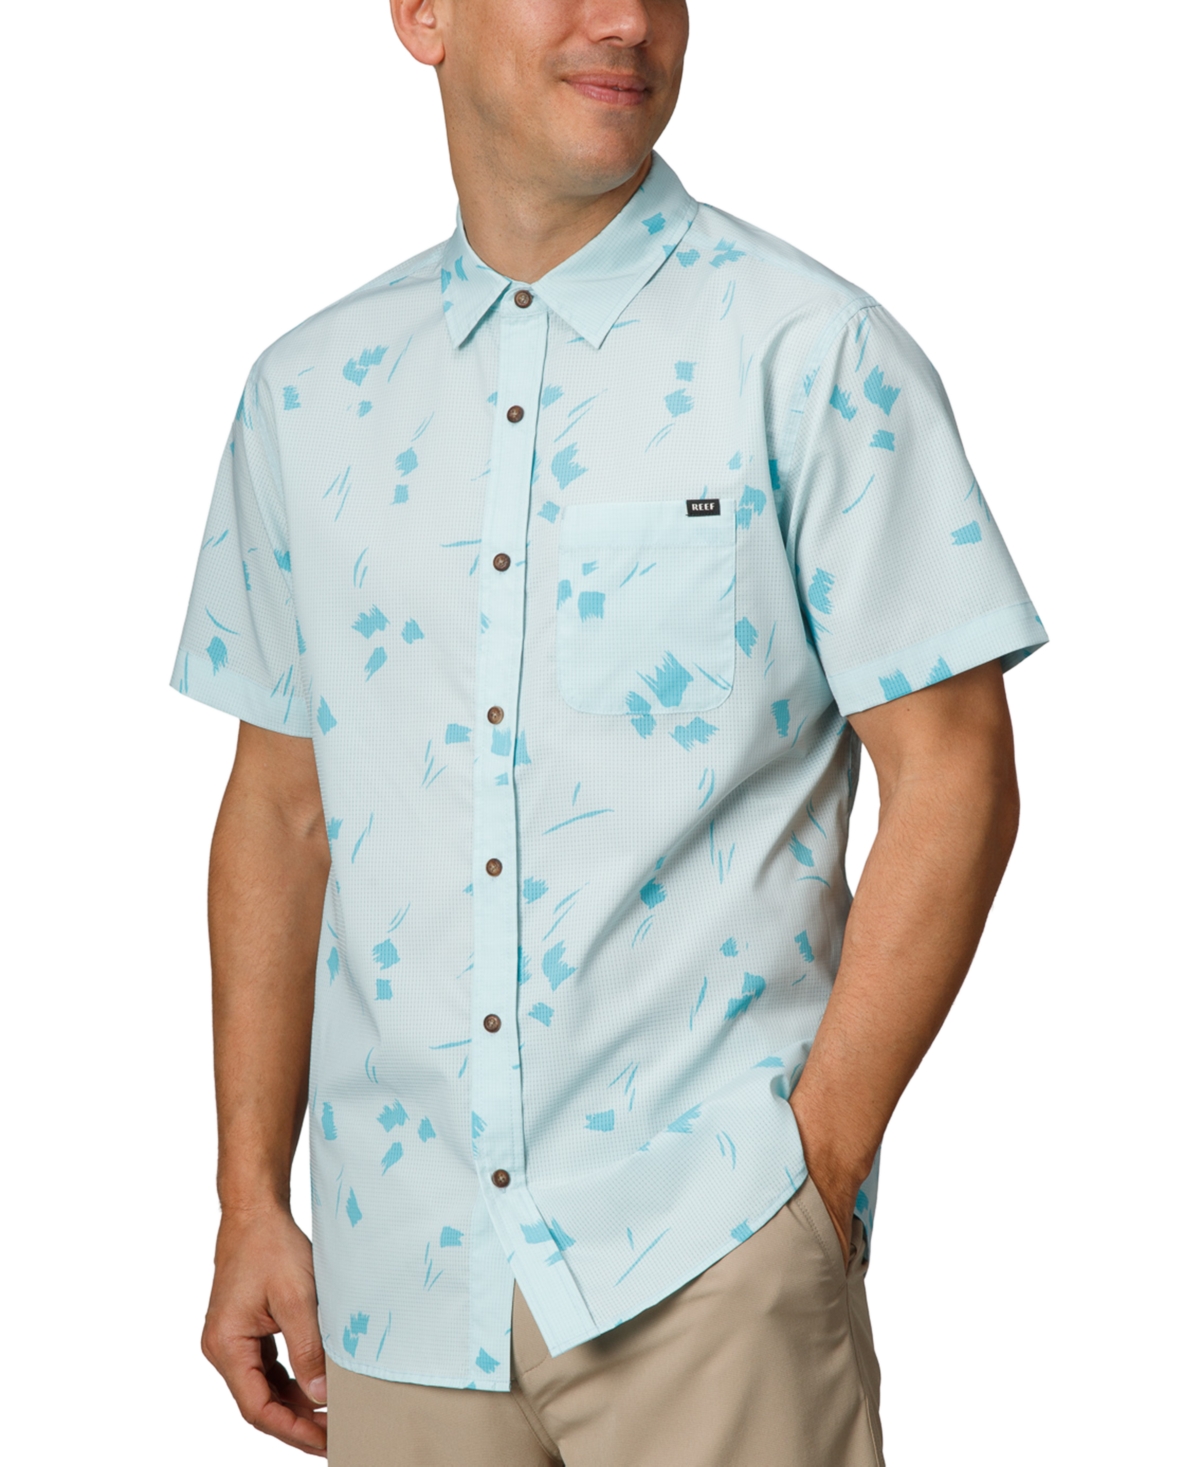 Men's Colton Short Sleeve Button-Front Perforated Printed Shirt - Clearwater